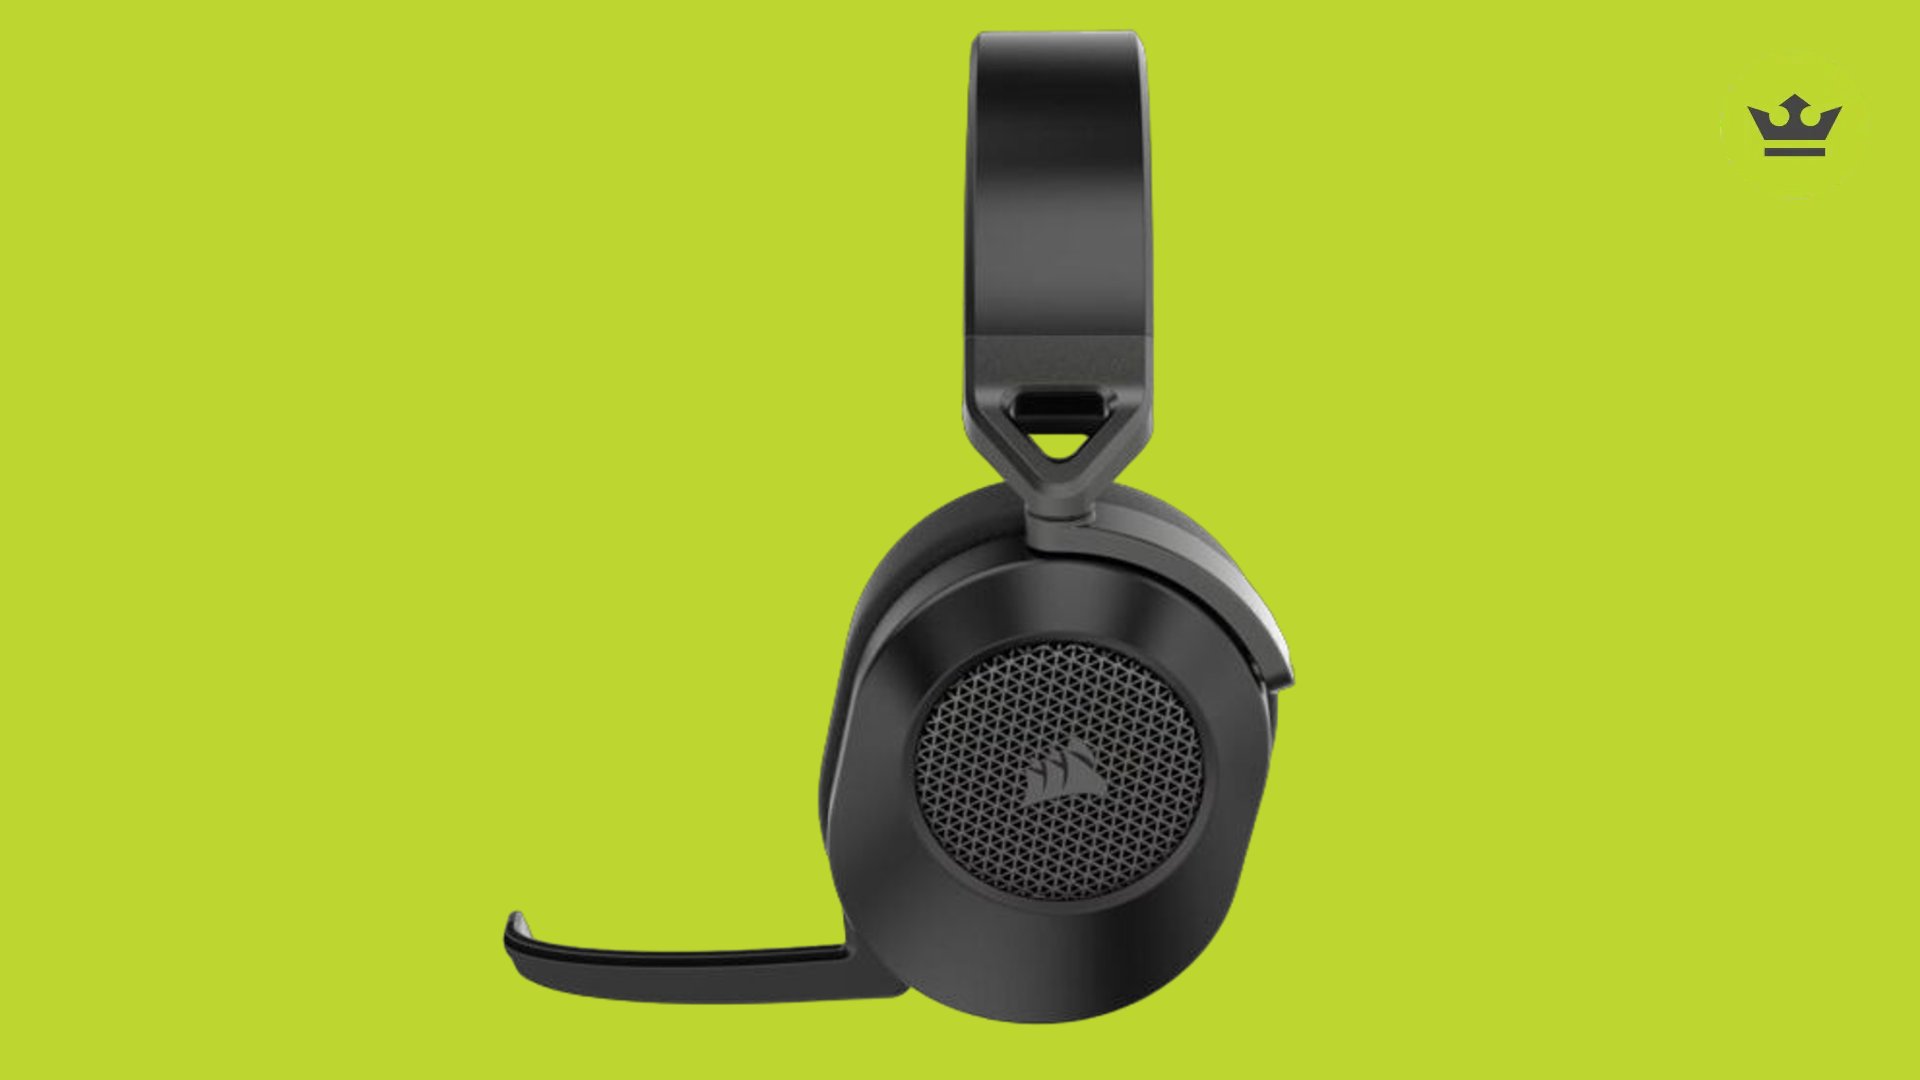 Best Cheap Gaming Headsets: The Corsair HS65 Wireless can be seen